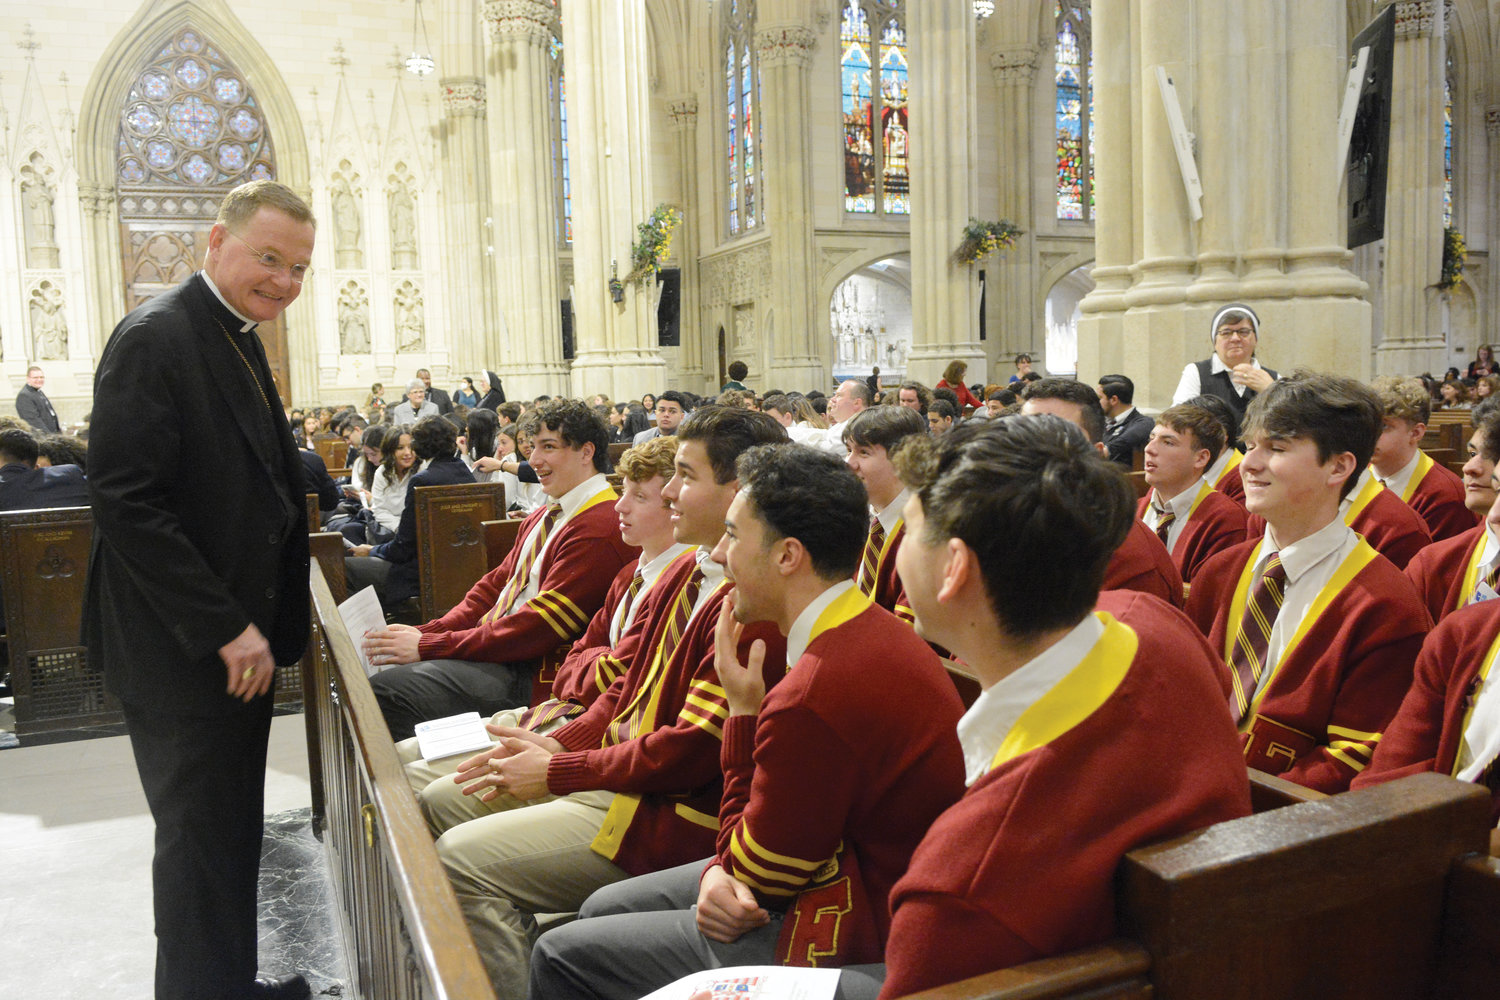 Auxiliary Bishop Edmund Whalen, a graduate and former principal of Msgr. Farrell High School on Staten Island, converses with members of Msgr. Farrell’s class of 2022.